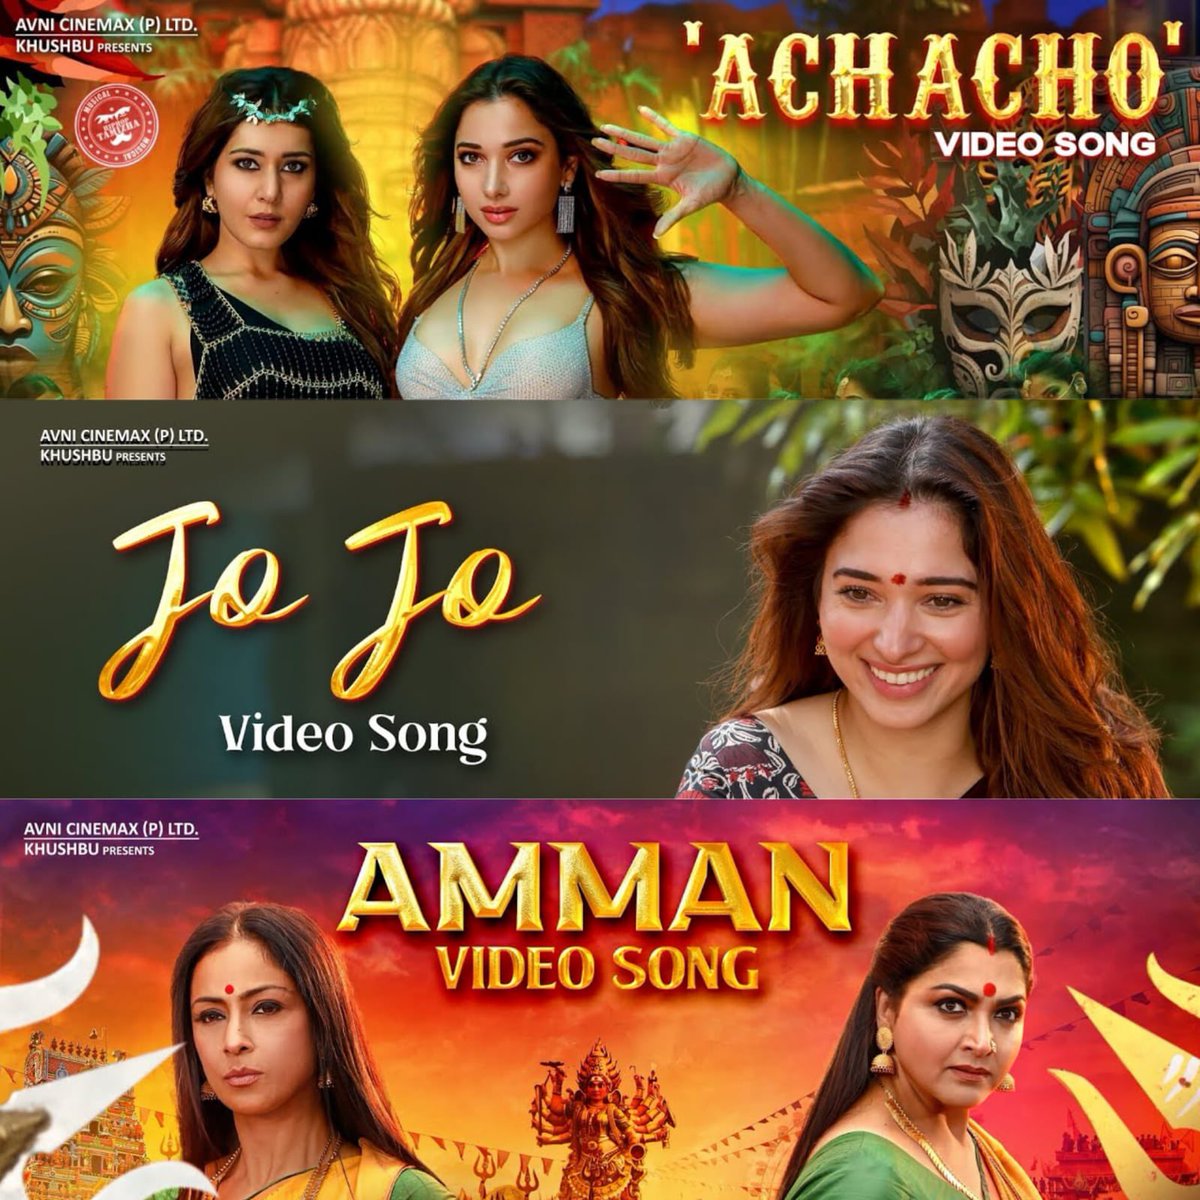 #Aranmanai4 continues its weekday success with strong family attendance, echoing its popularity with hits like #Achacho, #JoJo, and #Amman on YouTube. It's a solid blockbuster!